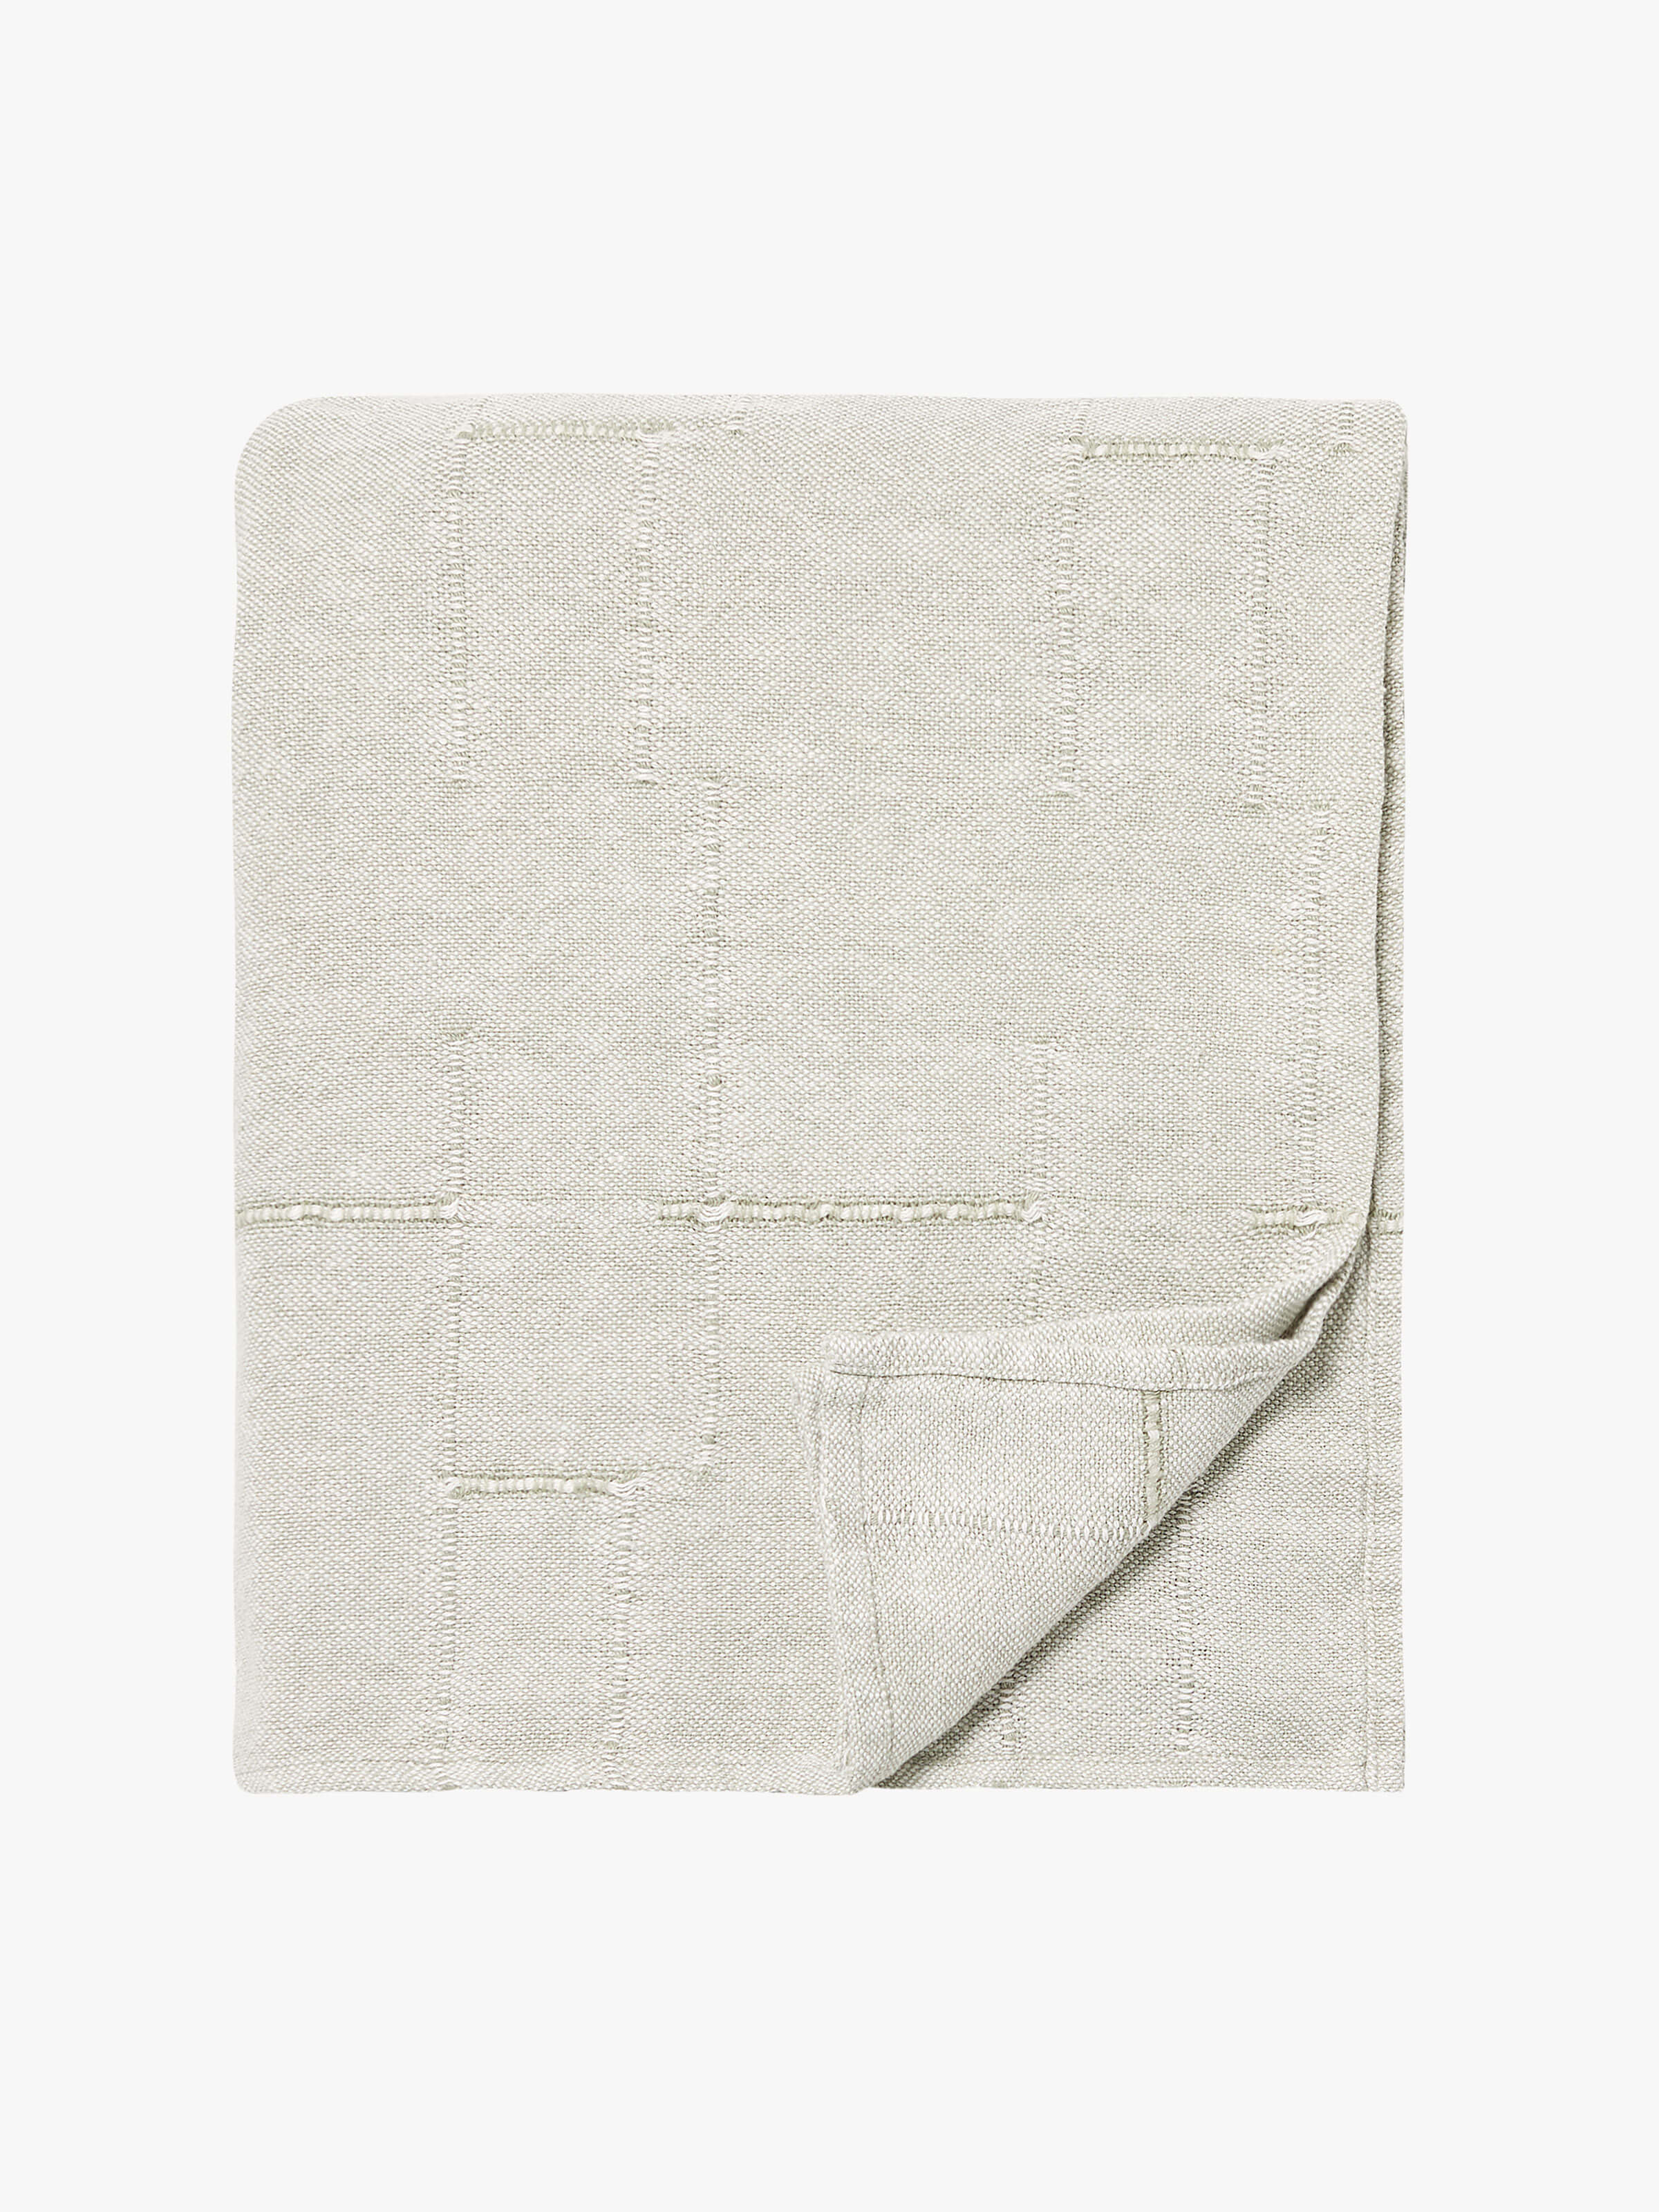 Palermo Sage French Linen Bedcover